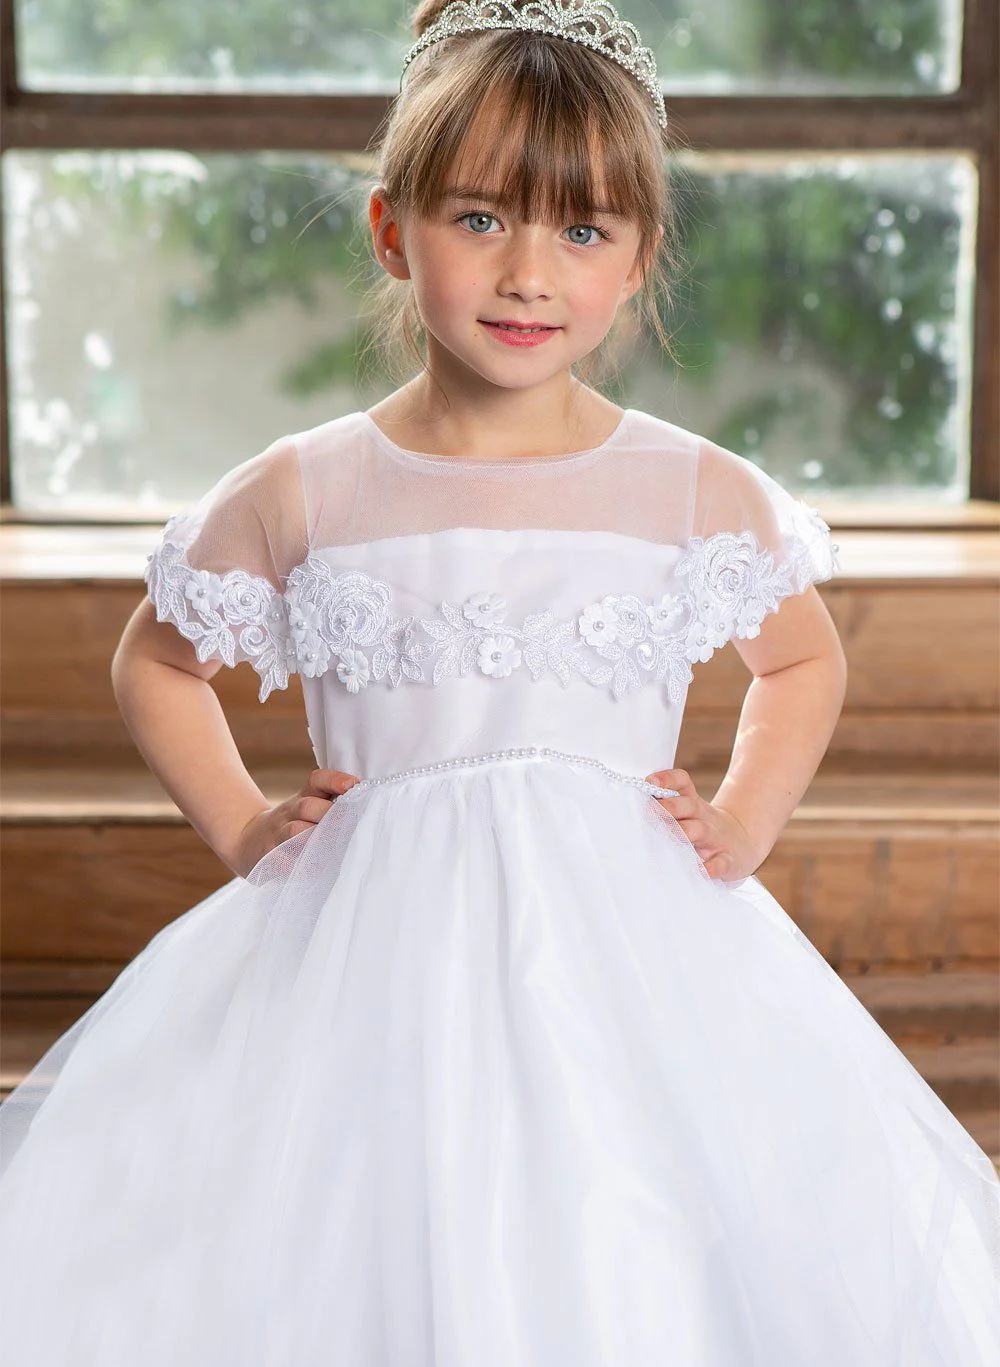 Ball-Gown/Princess White Flower Girl Dresses Pageant Dresses With Ankle-Length